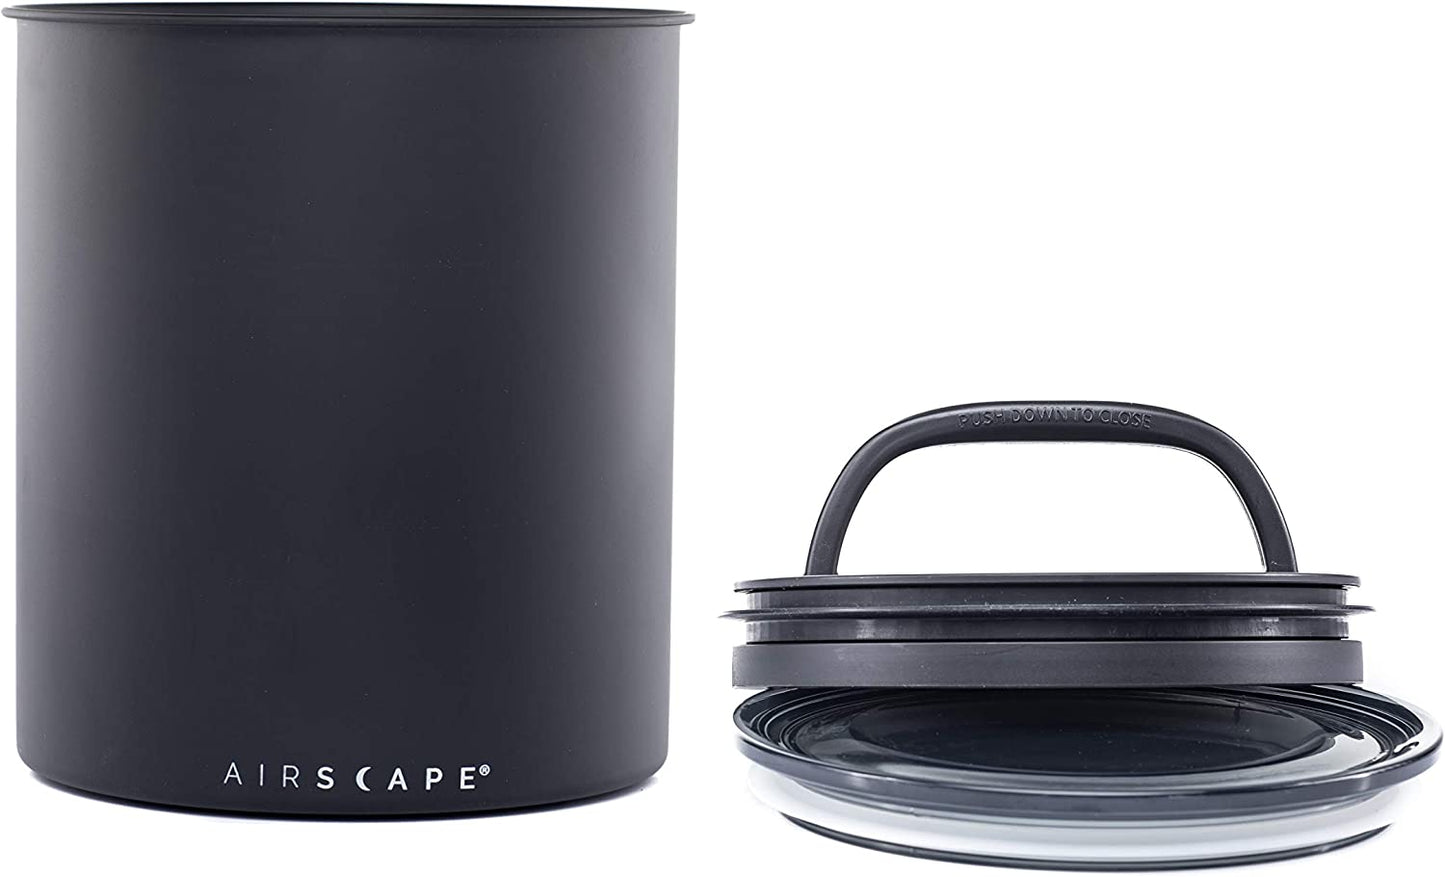 AIRSCAPE Vacuum Sealed Coffee Storage Canister - Charcoal (Black Matte)